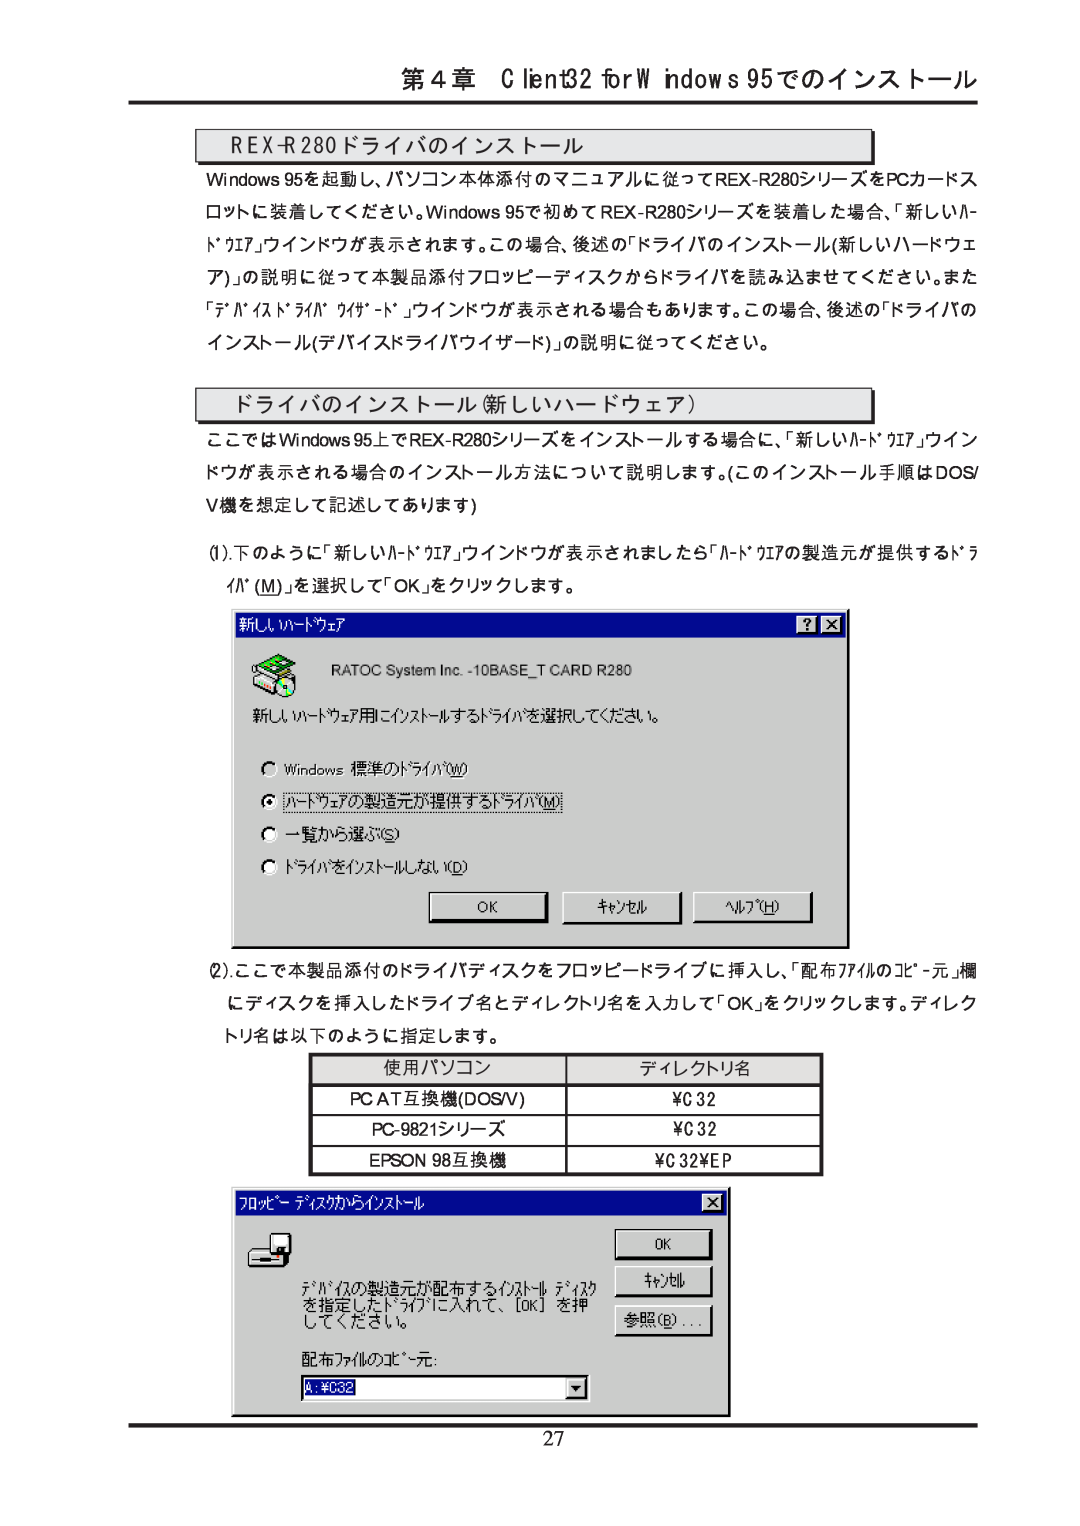 Ratoc Systems manual REX-R280ドライバのインストール, 第４章 Client32 for Windows 95でのインストール, ドライバのインストール新しいハードウェア 